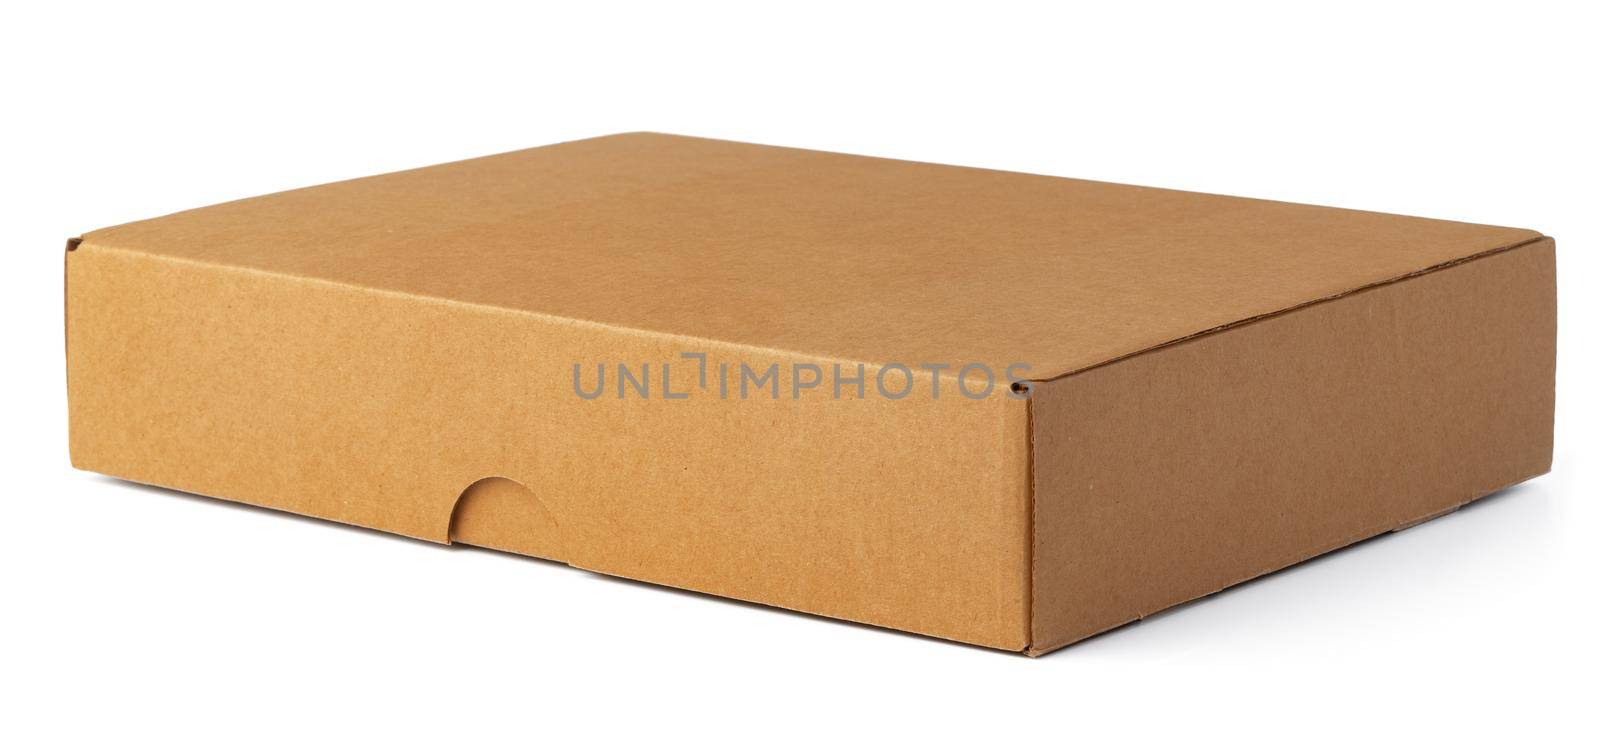 Brown cardboard box isolated on white background by Fabrikasimf